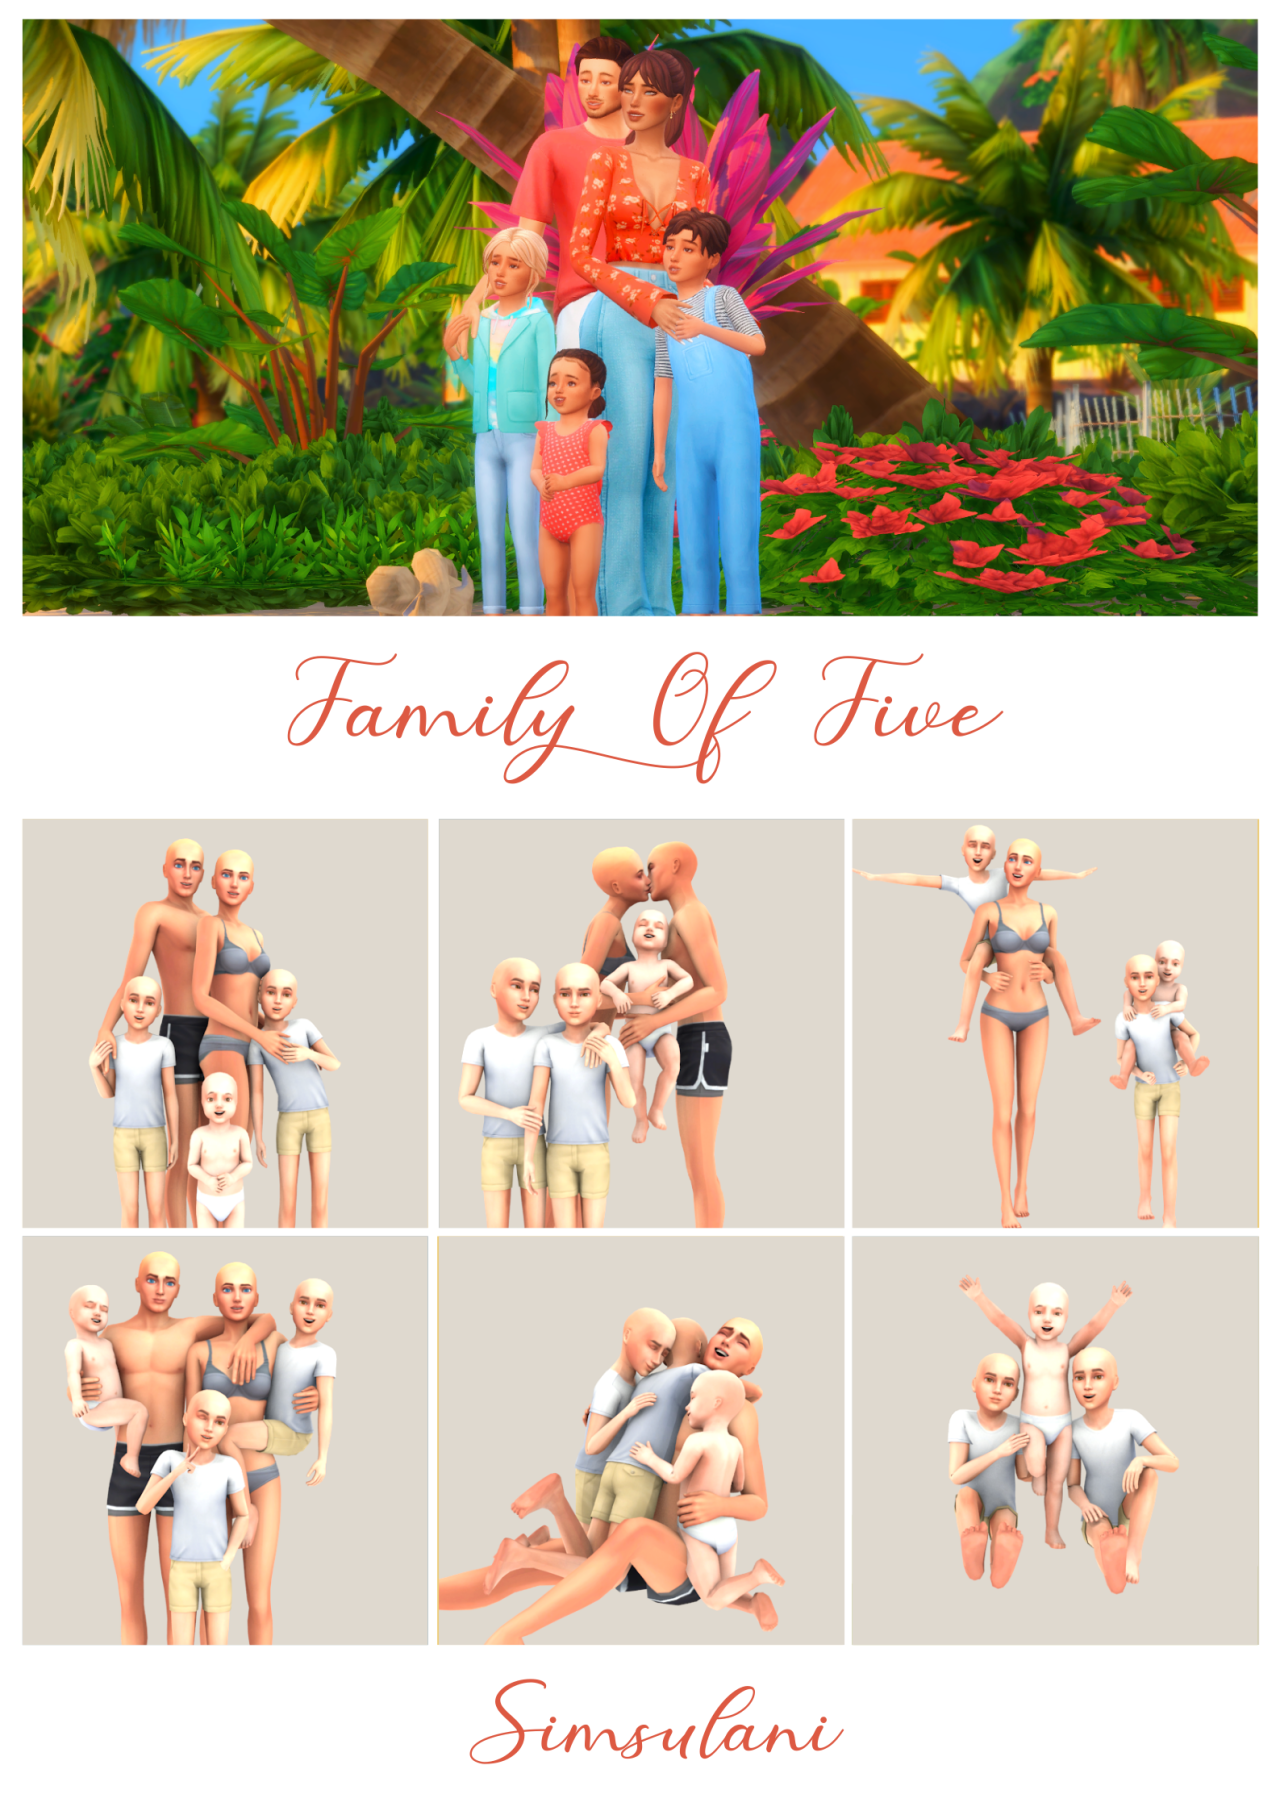 Free Photos - A Family Of Five Poses For A Group Photo In Traditional  Indian Clothing. | FreePixel.com